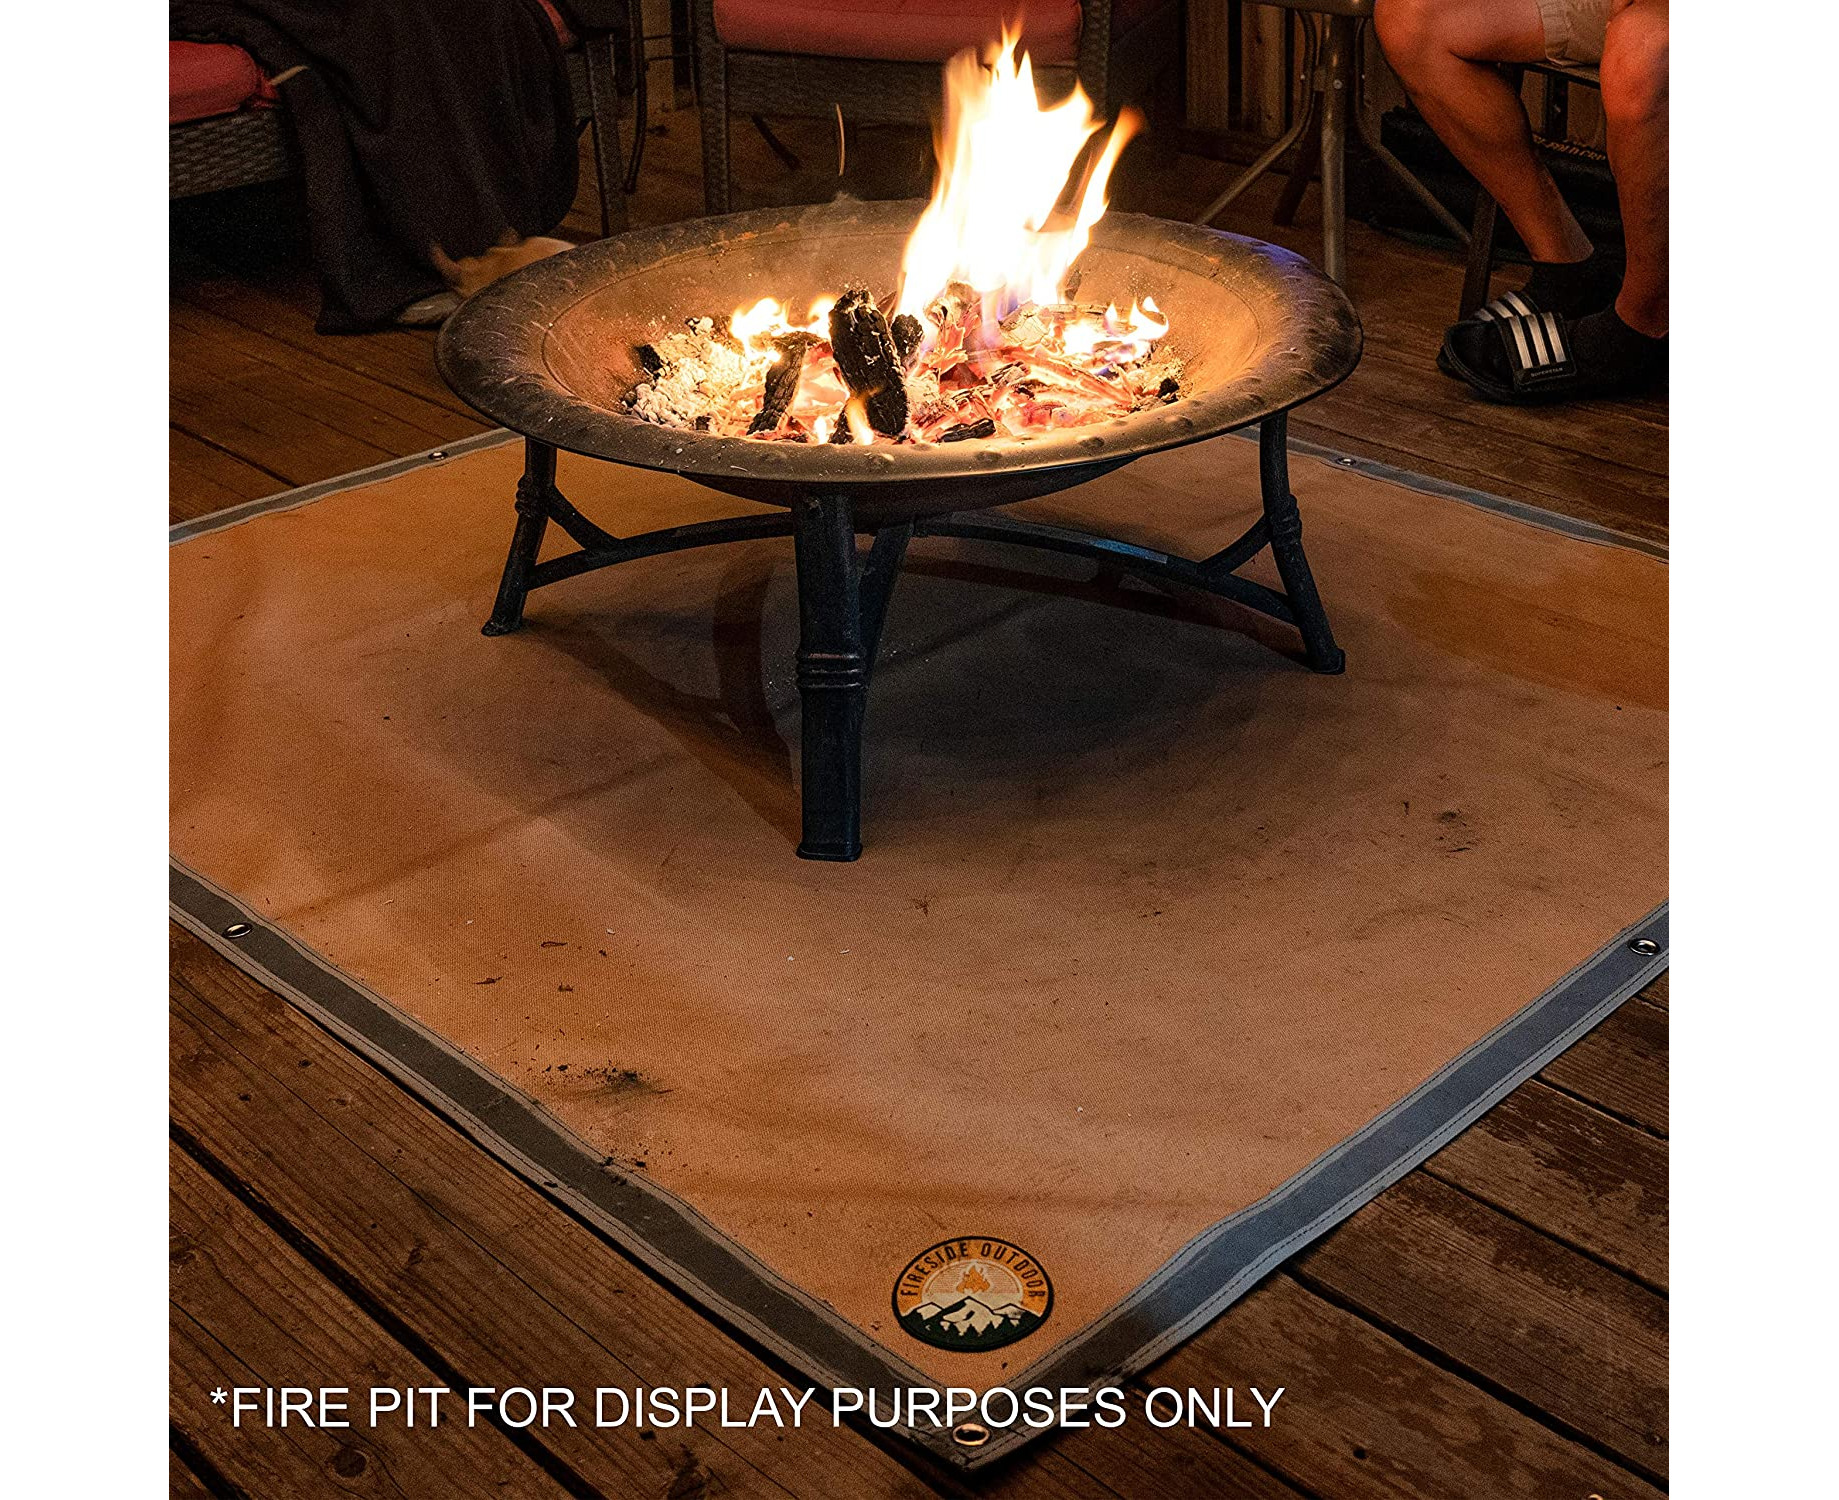 Under Grill Mat|Fire Pit Mat|Fireproof Pad Protective Deck Wood Patio Mat Grass Charcoal Grill Fire Pit Bonfires Lawn CampingGround|Indoor Ember Mat|Visible at Night|Campsite from Popping|36Inch Round 